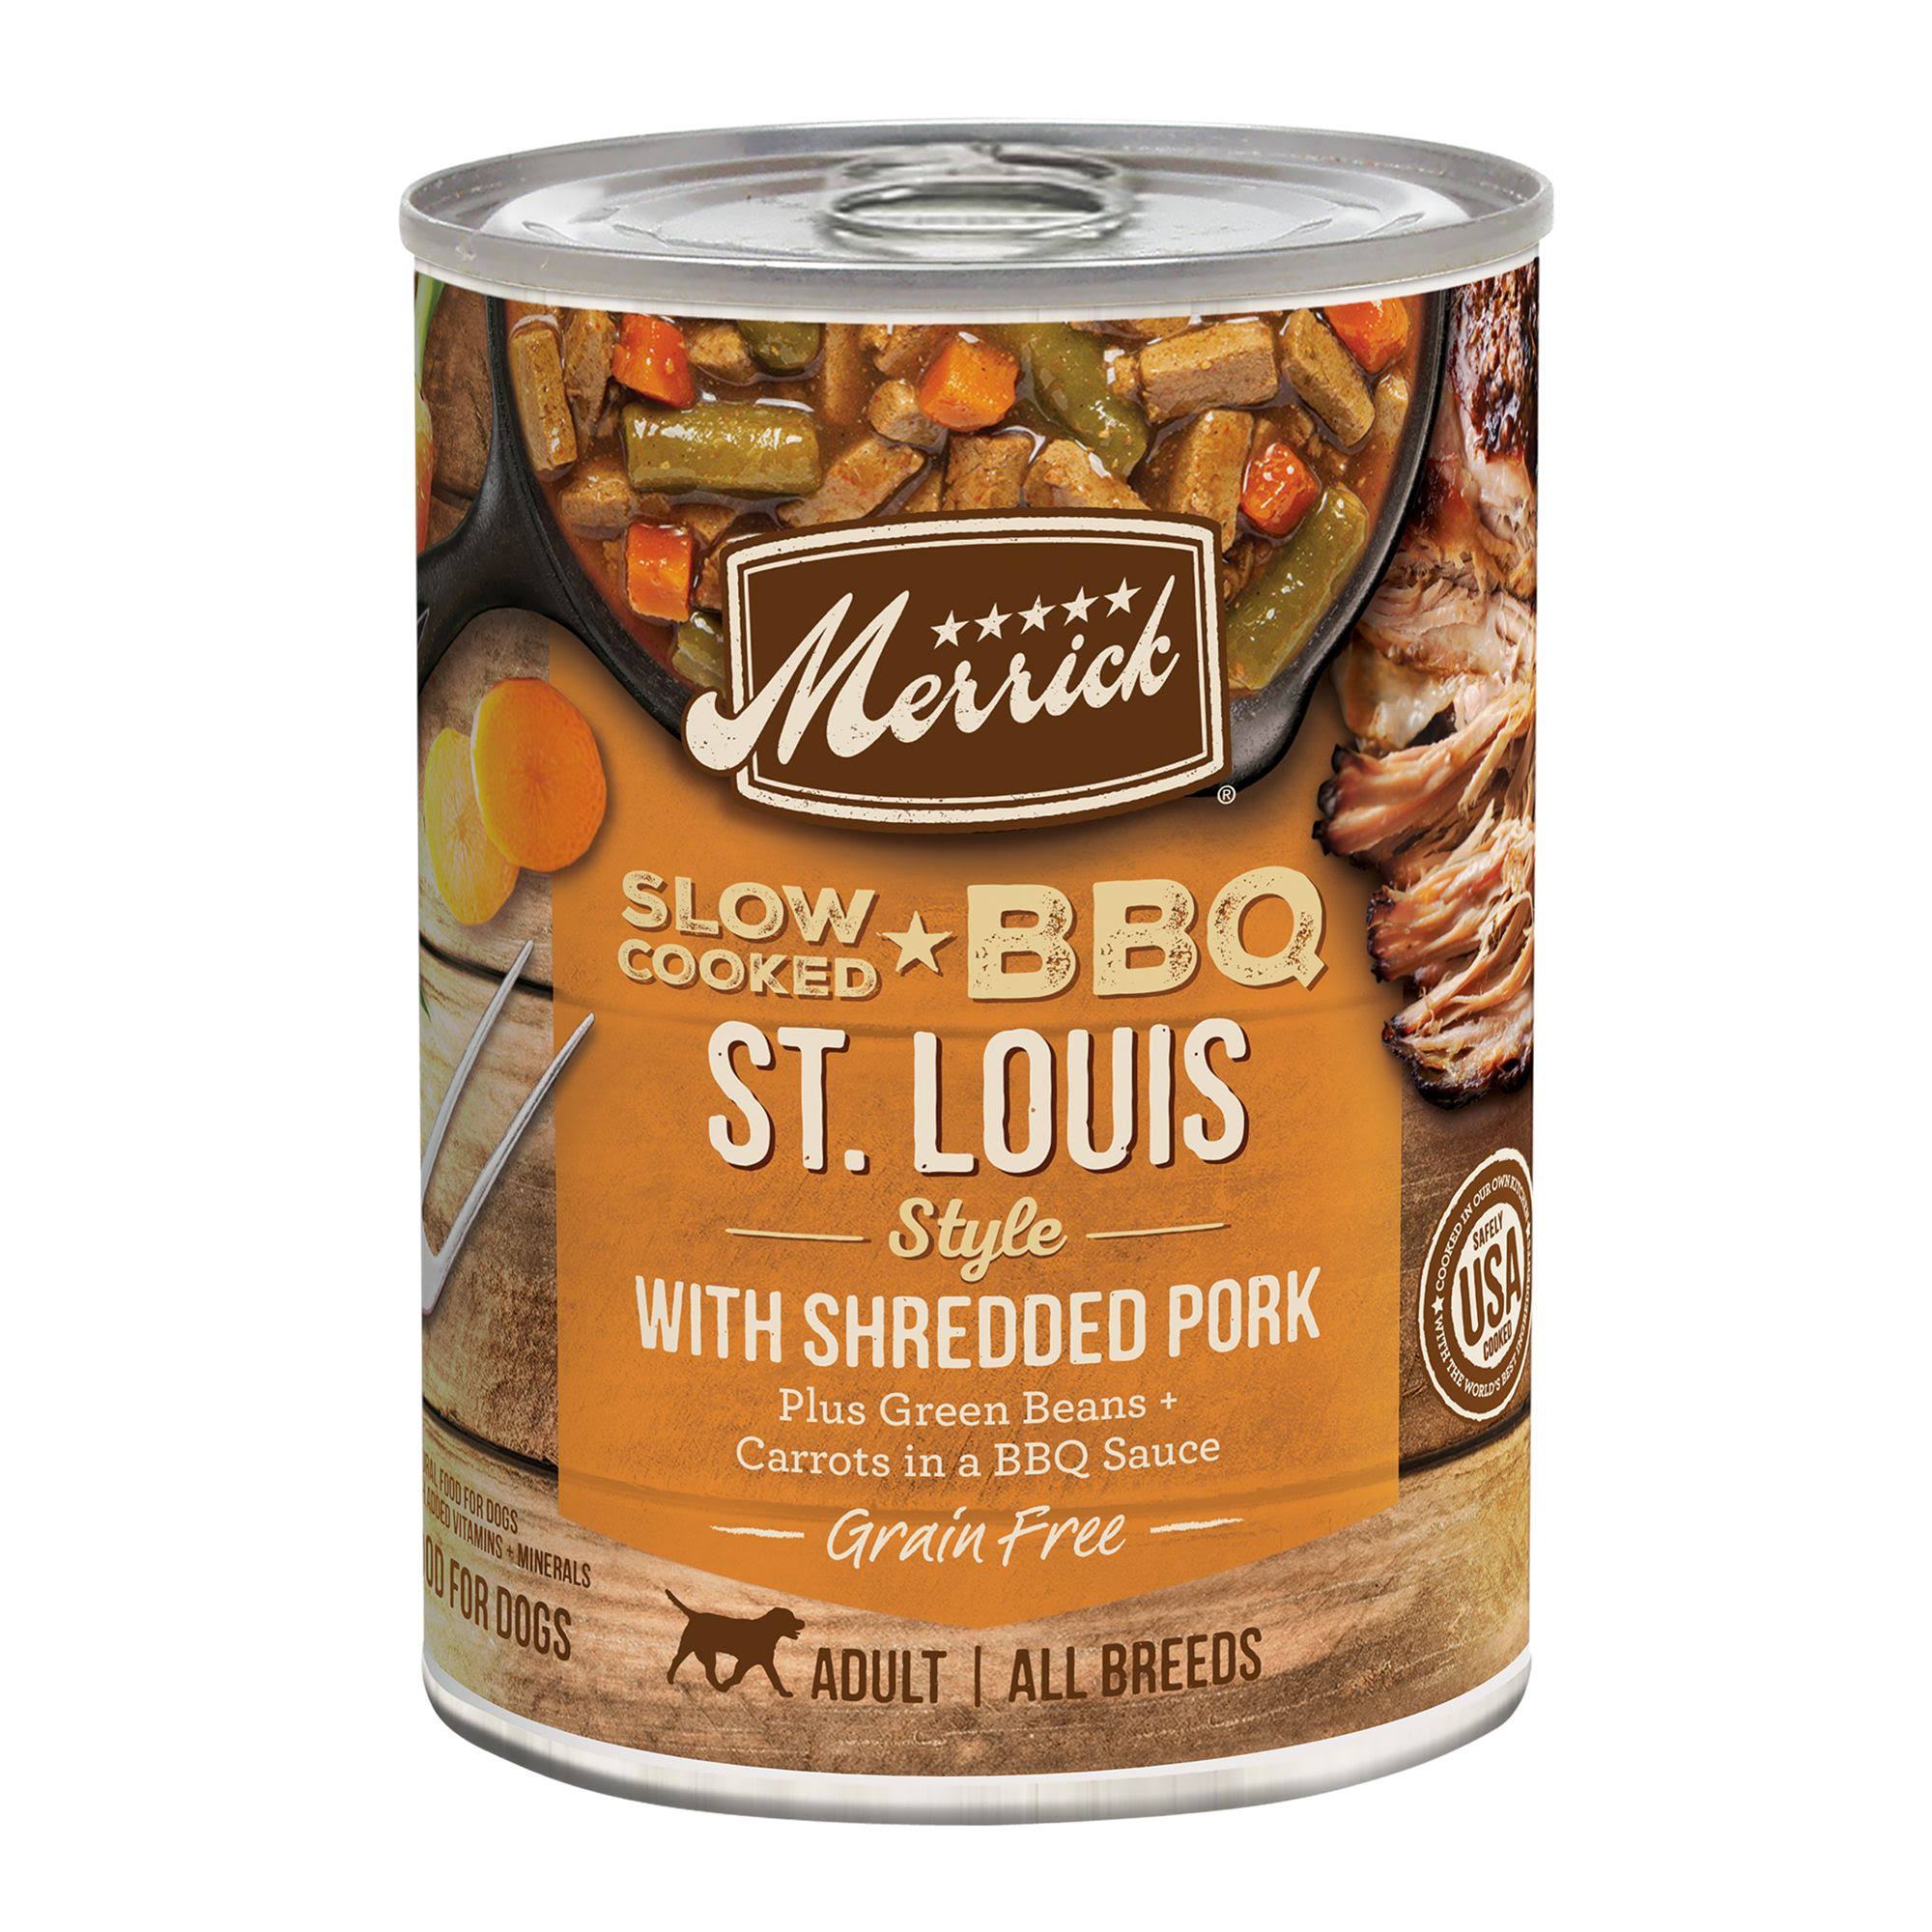 Merrick Slow-Cooked BBQ - St. Louis Style 12.7oz